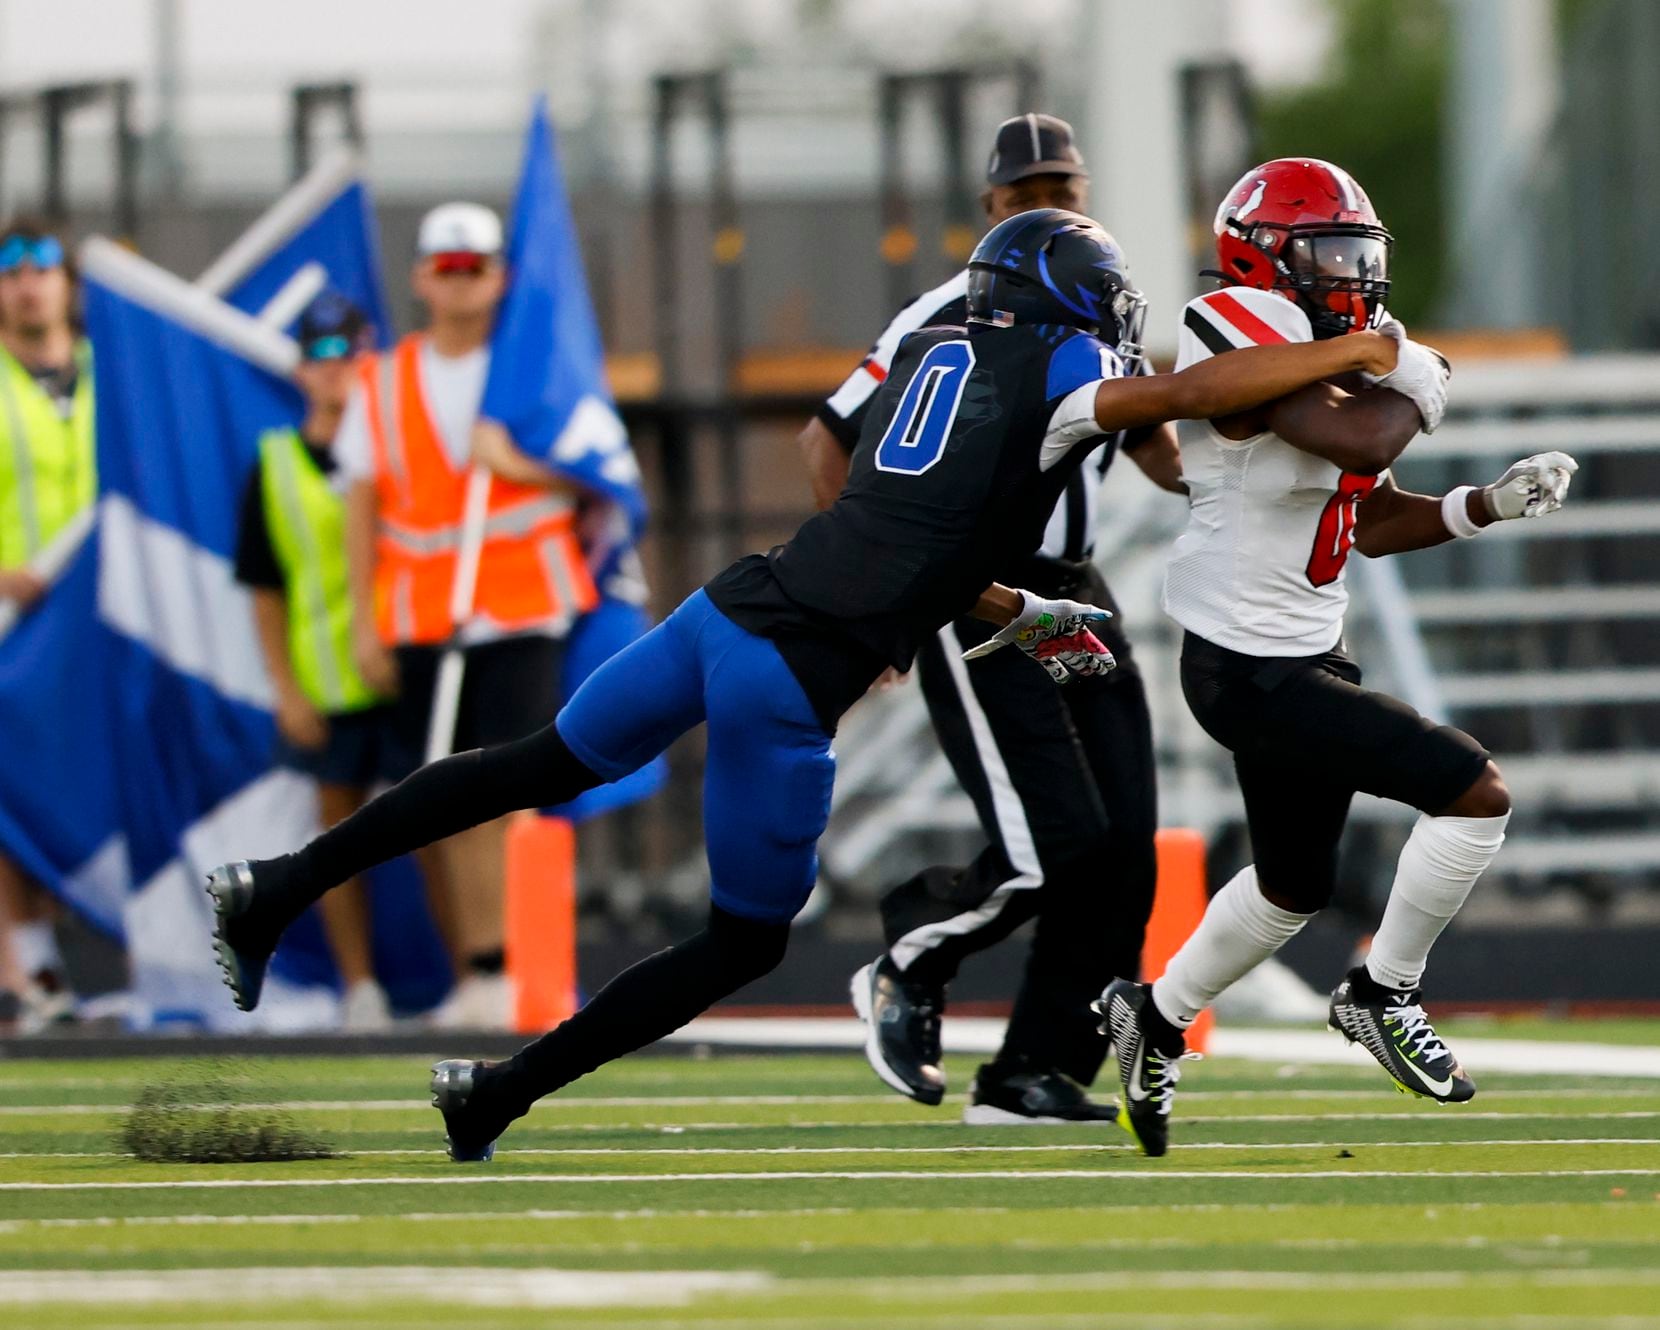 North Forney’s Isiah Mayfield (0) fails to tackle Mesquite Horn’s defensive back Jayden...